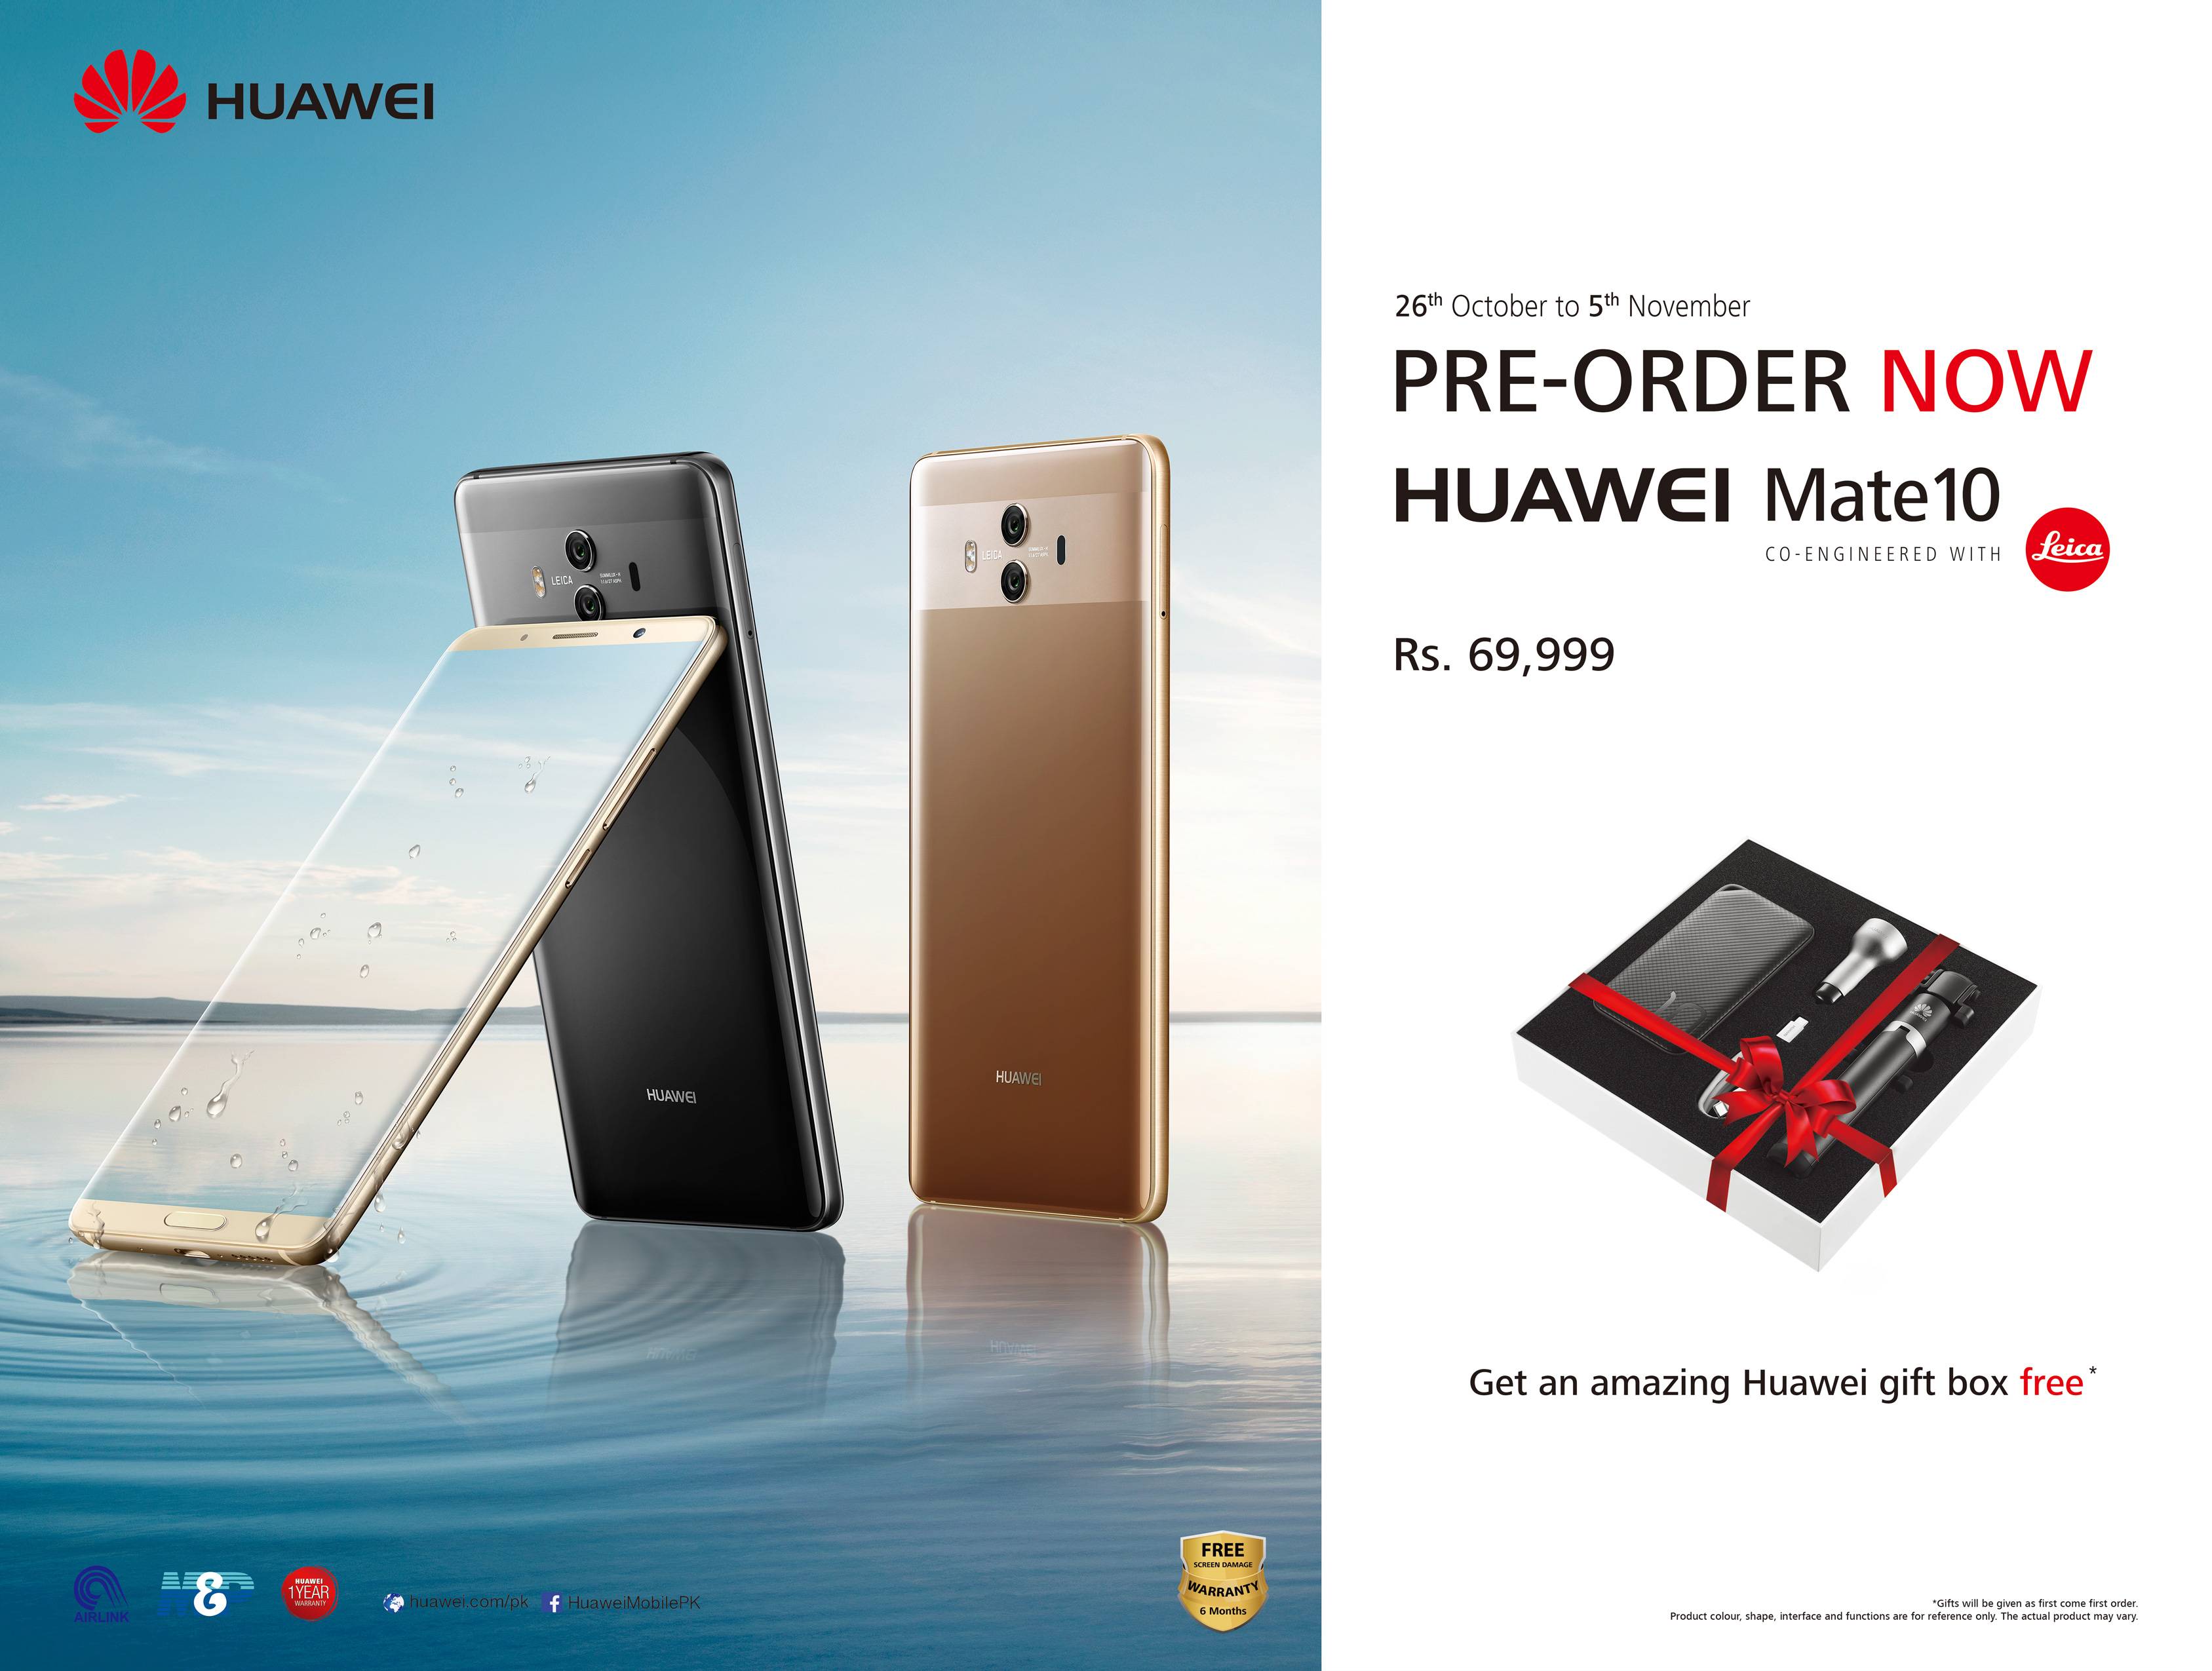 HUAWEI Mate 10 Pro – A Game Changer in Smartphone Photography